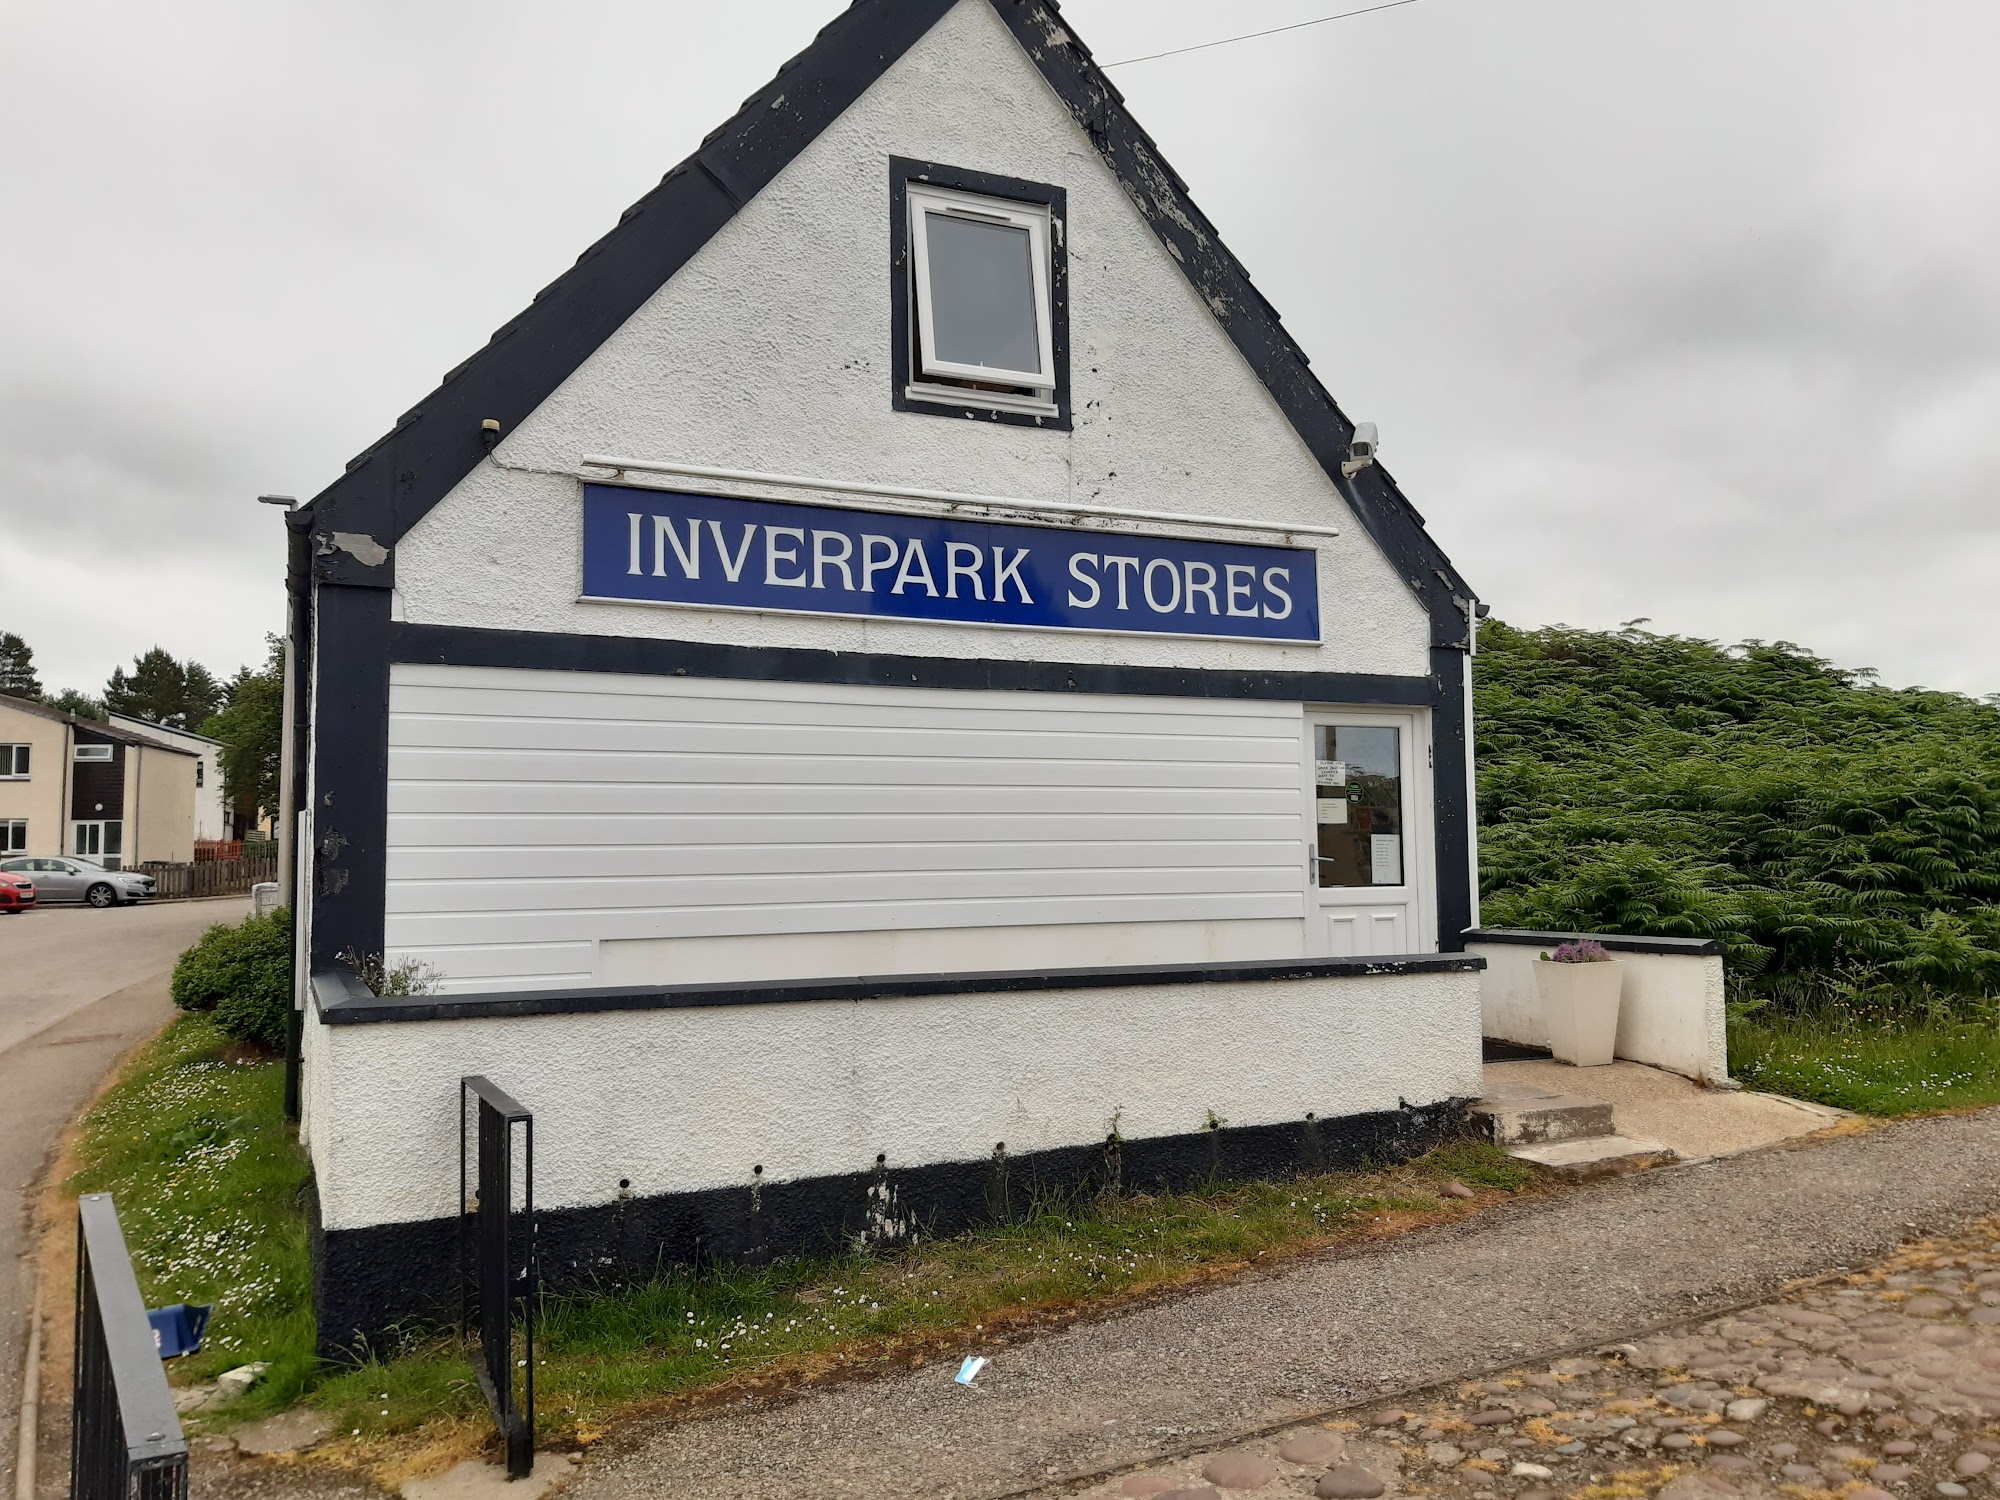 Inverpark Stores